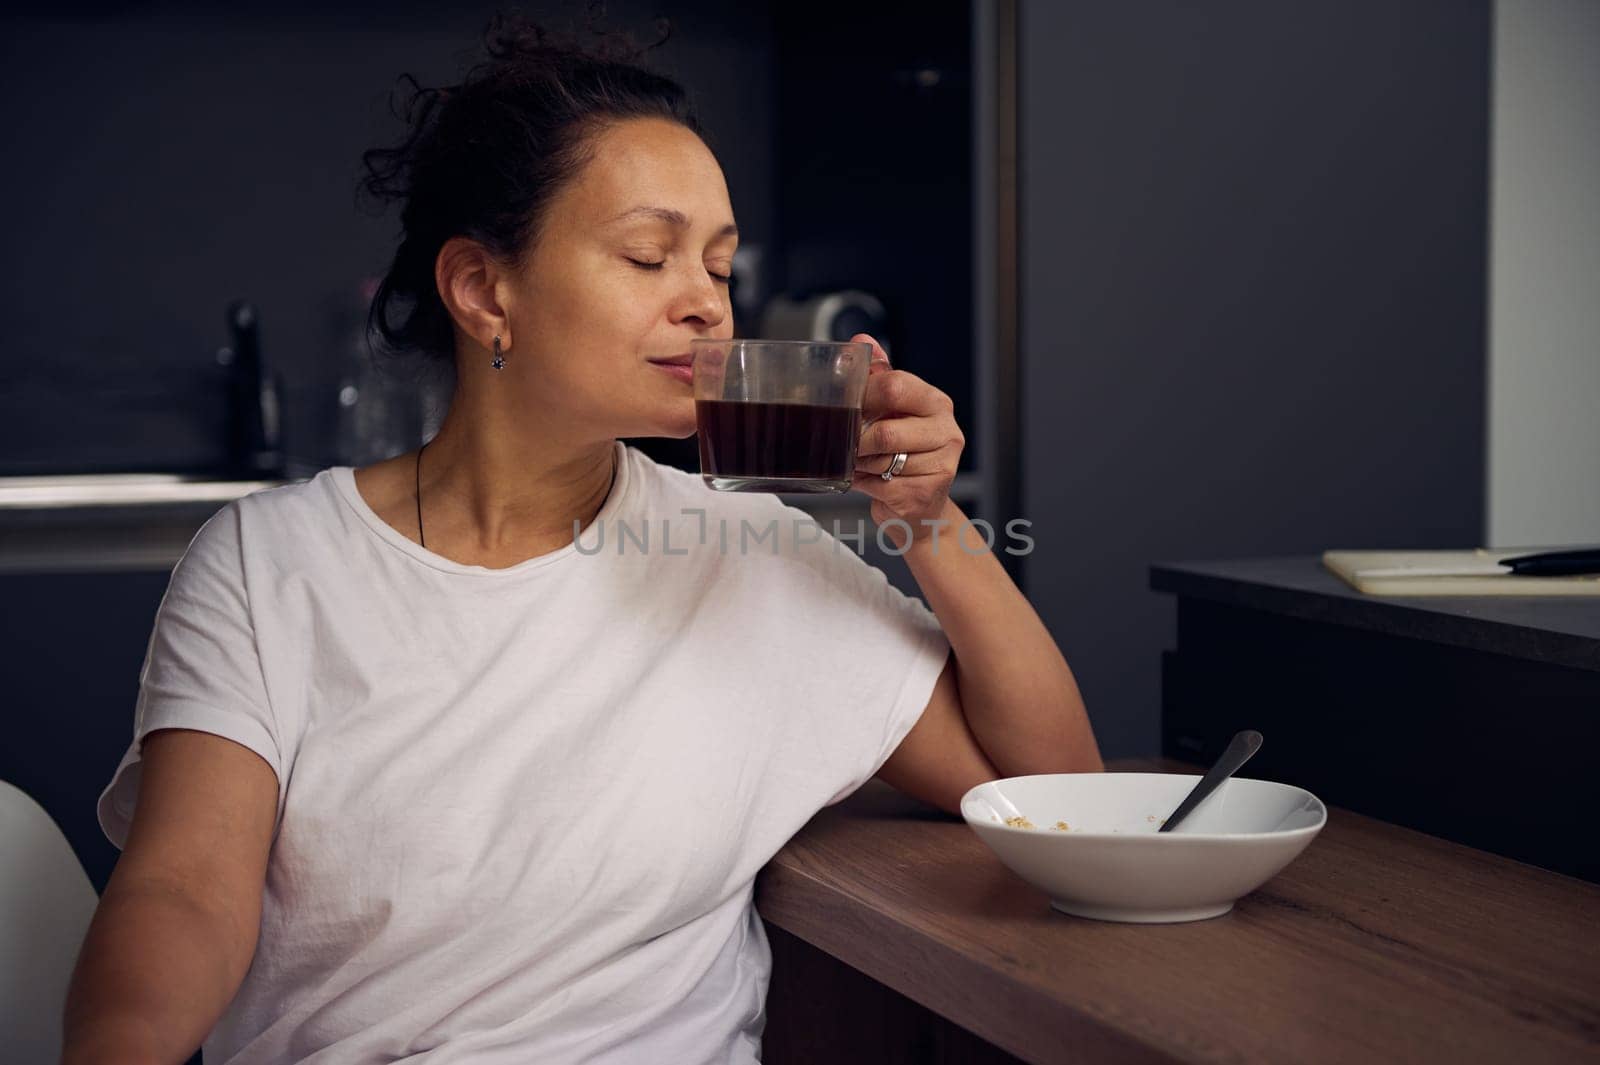 Close-up portrait of a young pretty woman in white pajamas, sitting with her eyes closed at the kitchen table, taking sip of a freshly brewed espresso coffee. People. Domestic life. Hobbies and leisure